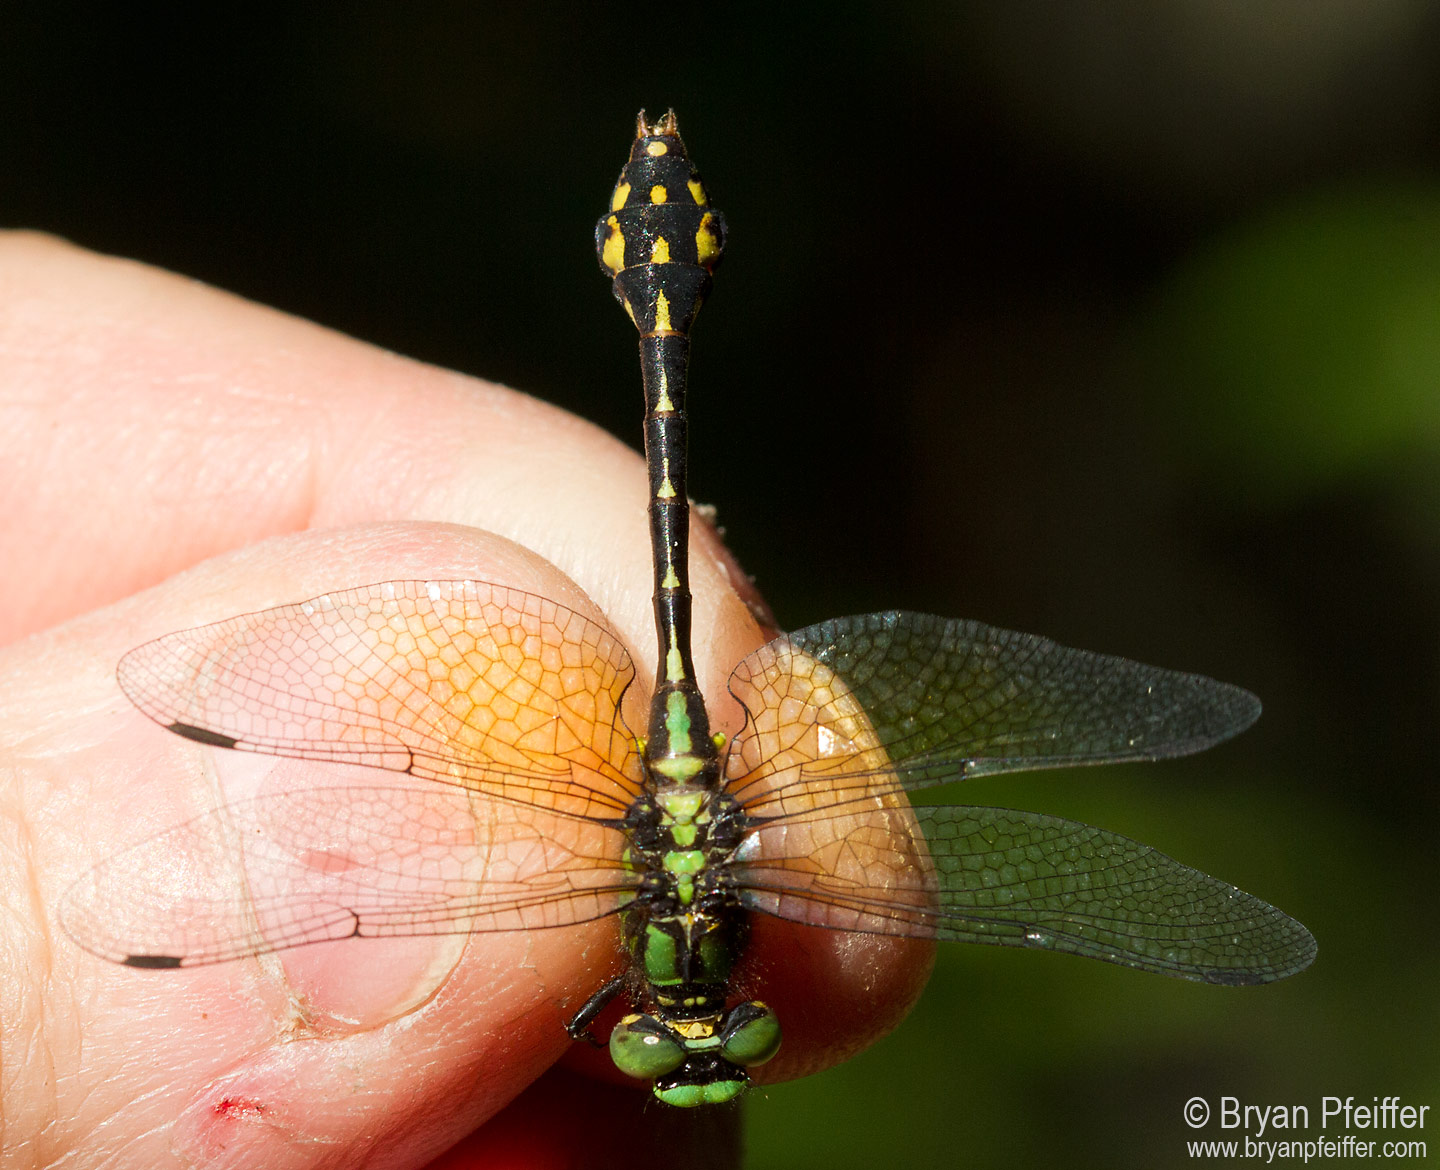 Ophiogomphus howei (Pygmy Snaketail)